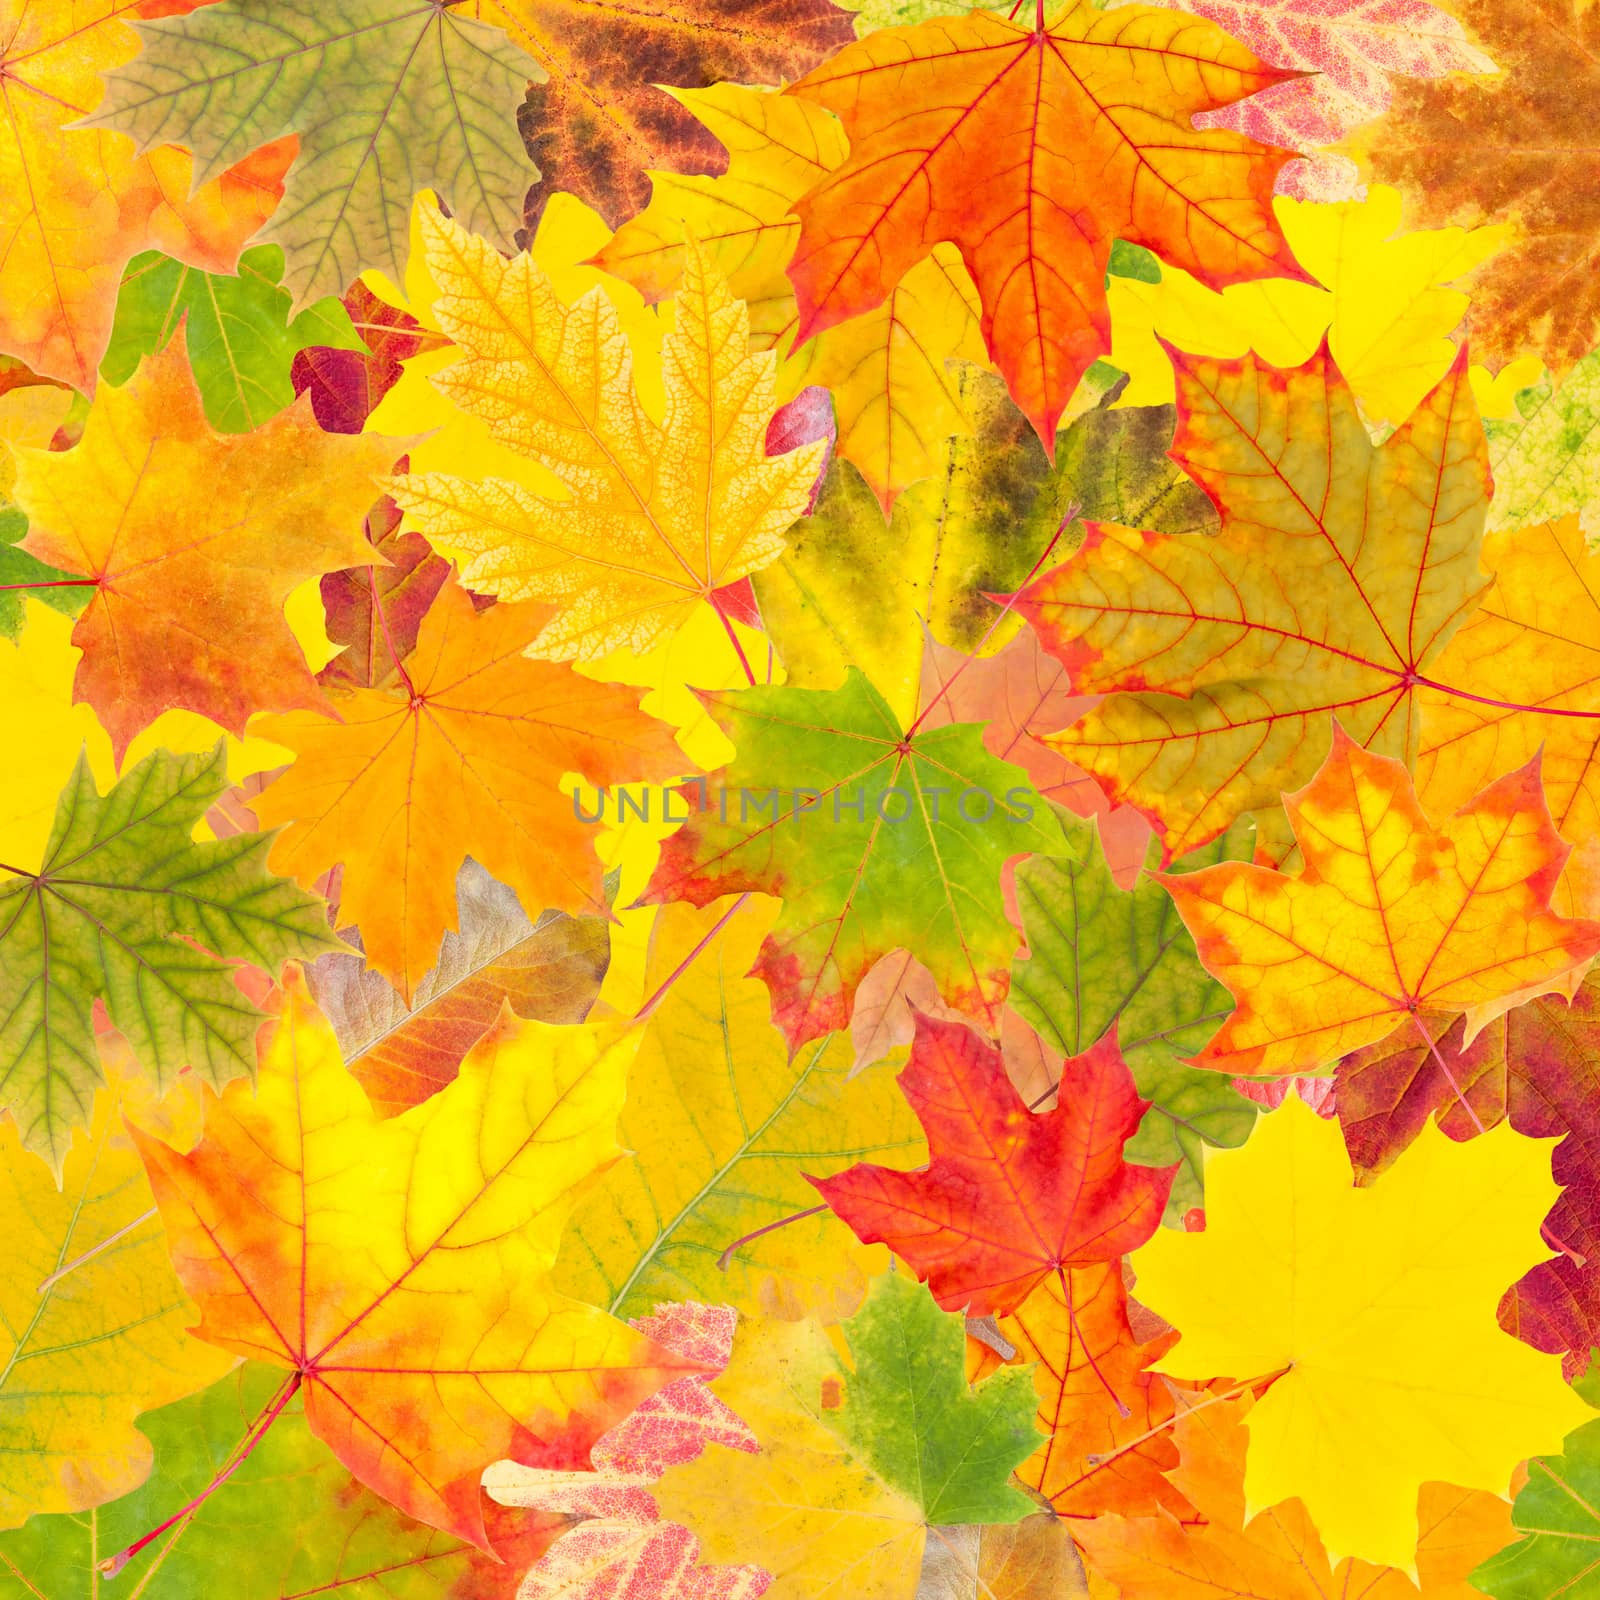 Autumn background with bright leaves